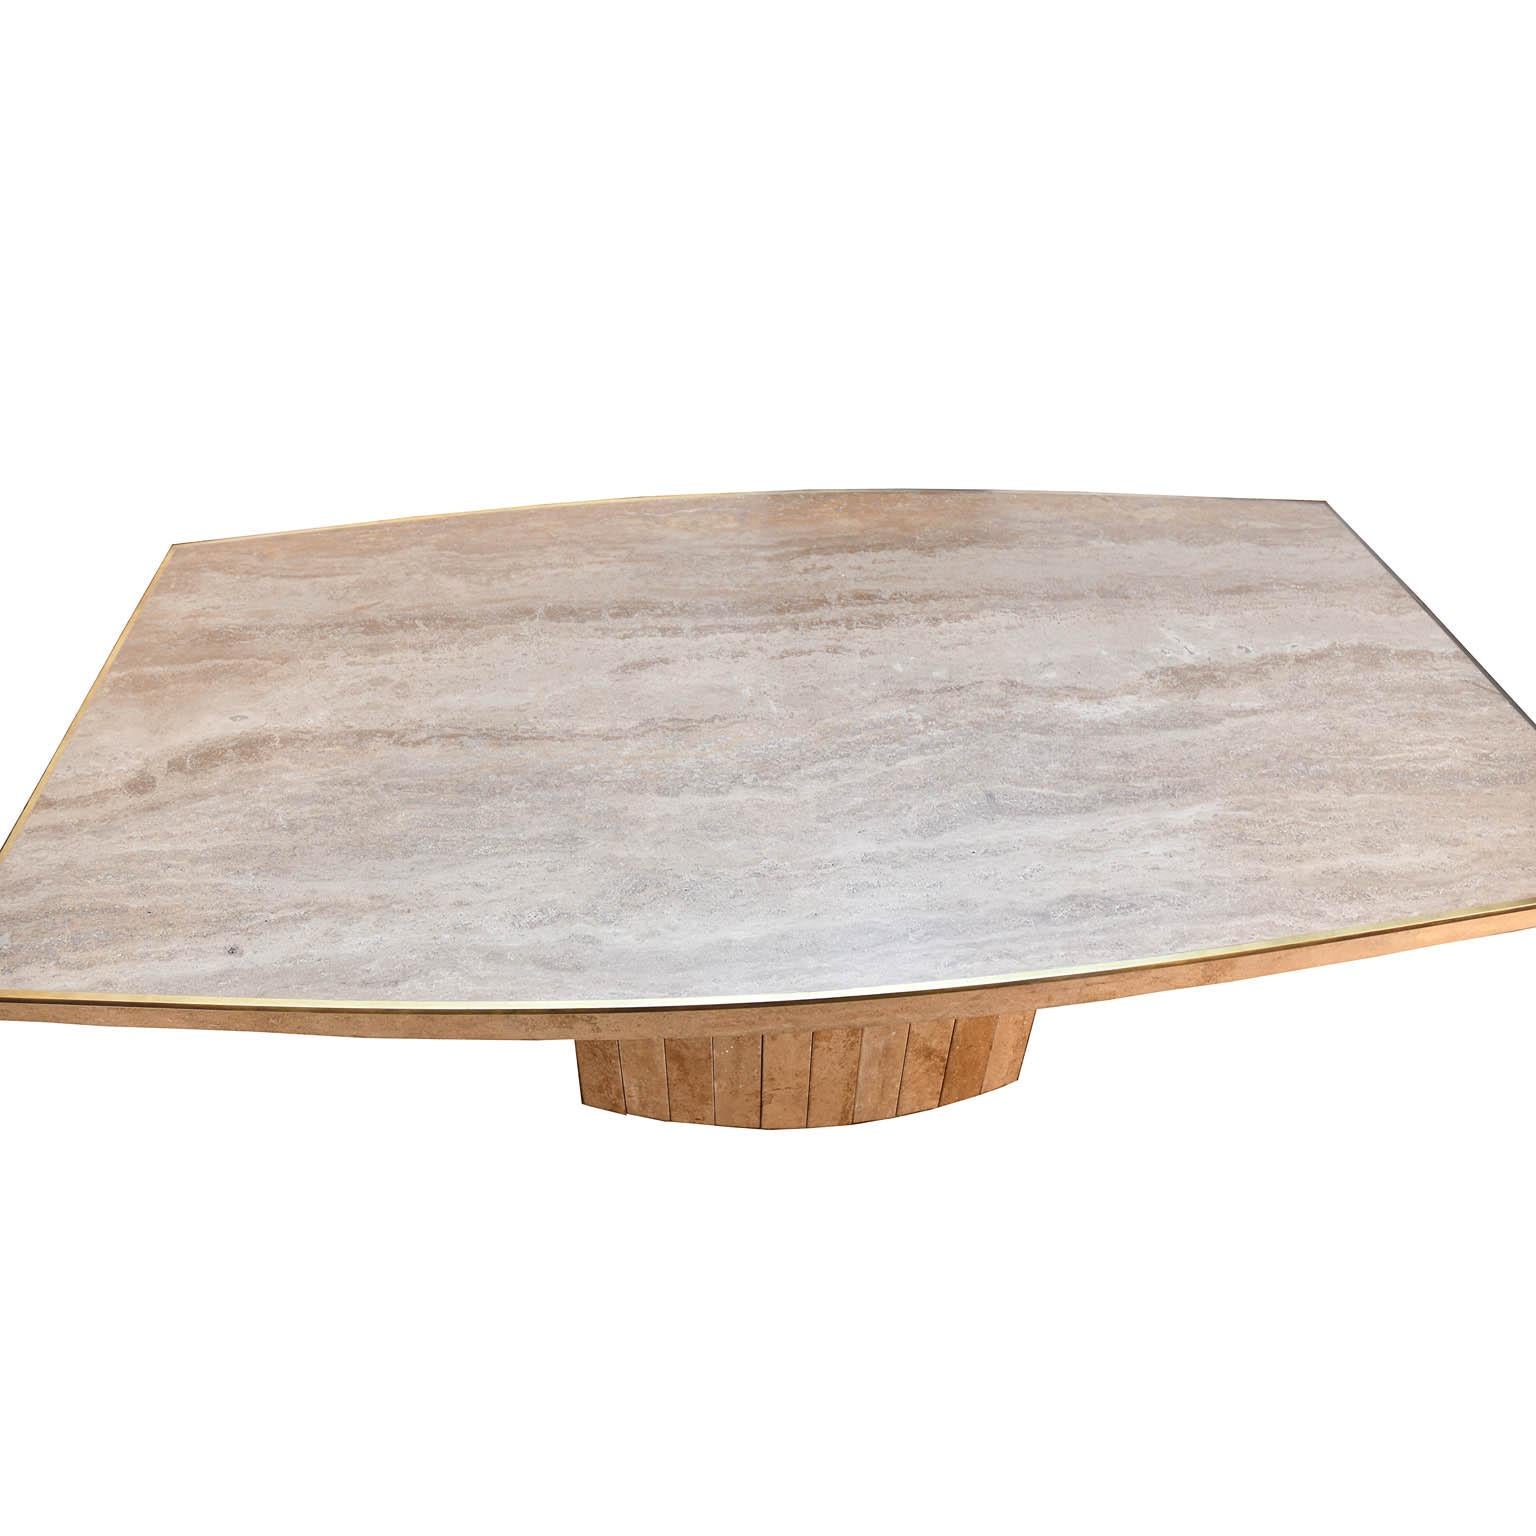 Willy Rizzo Marble Dining Table 1970s France Signed Travertine Reddish Brown In Good Condition For Sale In Vienna, AT